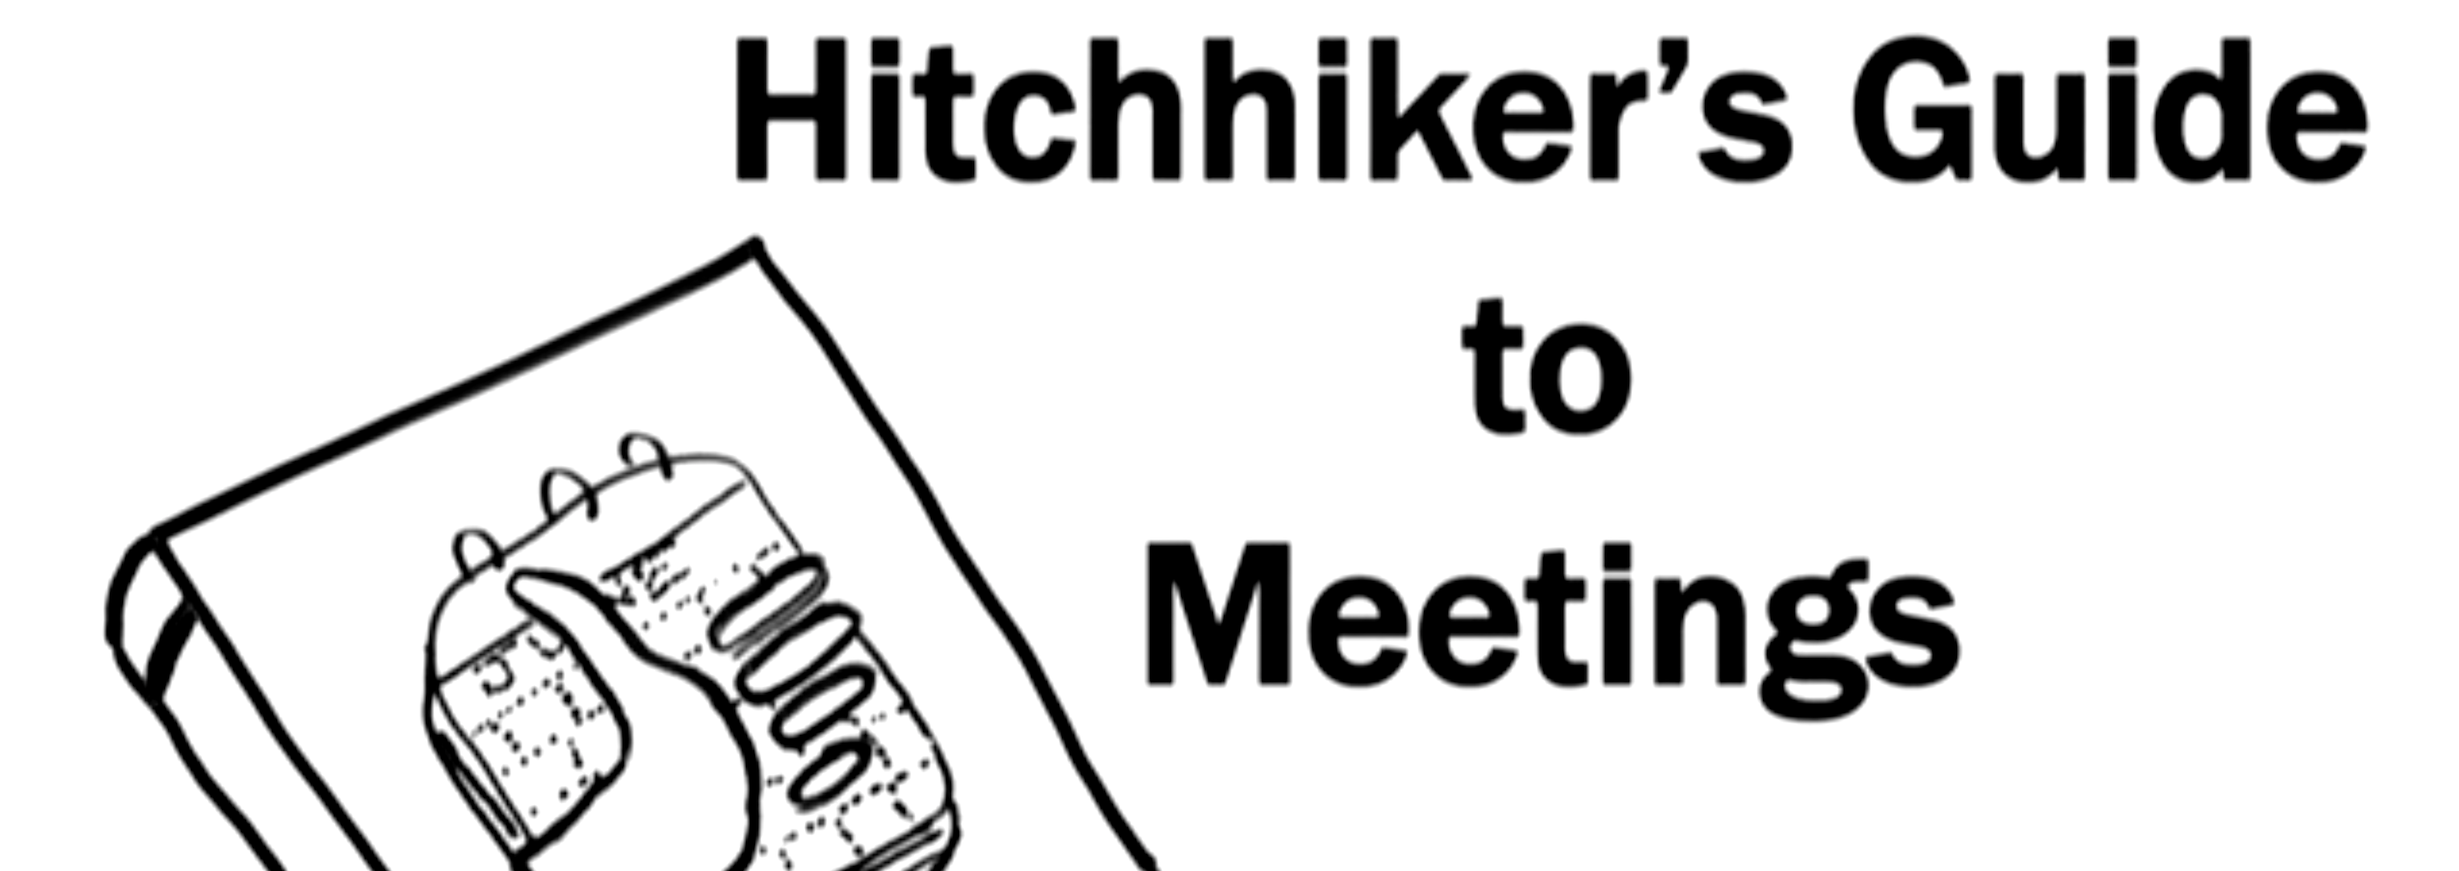 /talks/hitchhikers-guide-to-meetings/hitchhikers-guide-to-meetings.png